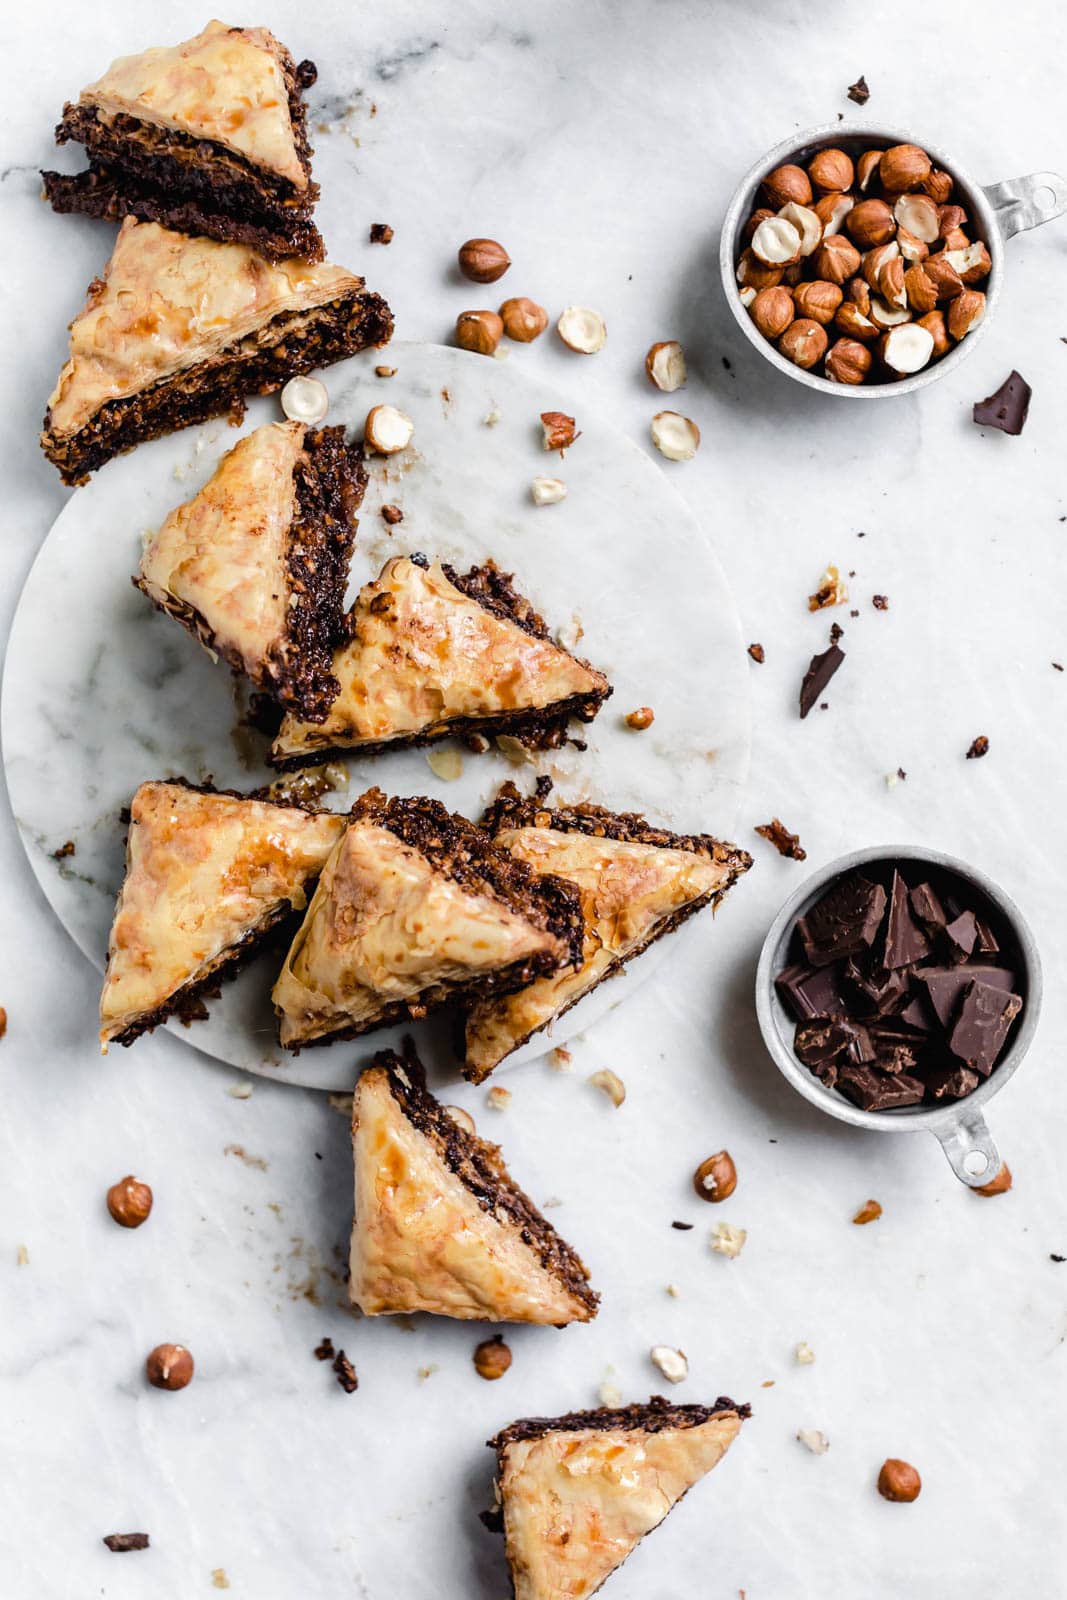 An out-of-this-world Chocolate Hazelnut Baklava soaked in a cocoa nib and honey syrup. From the Sofra bakery cookbook, Soframiz!